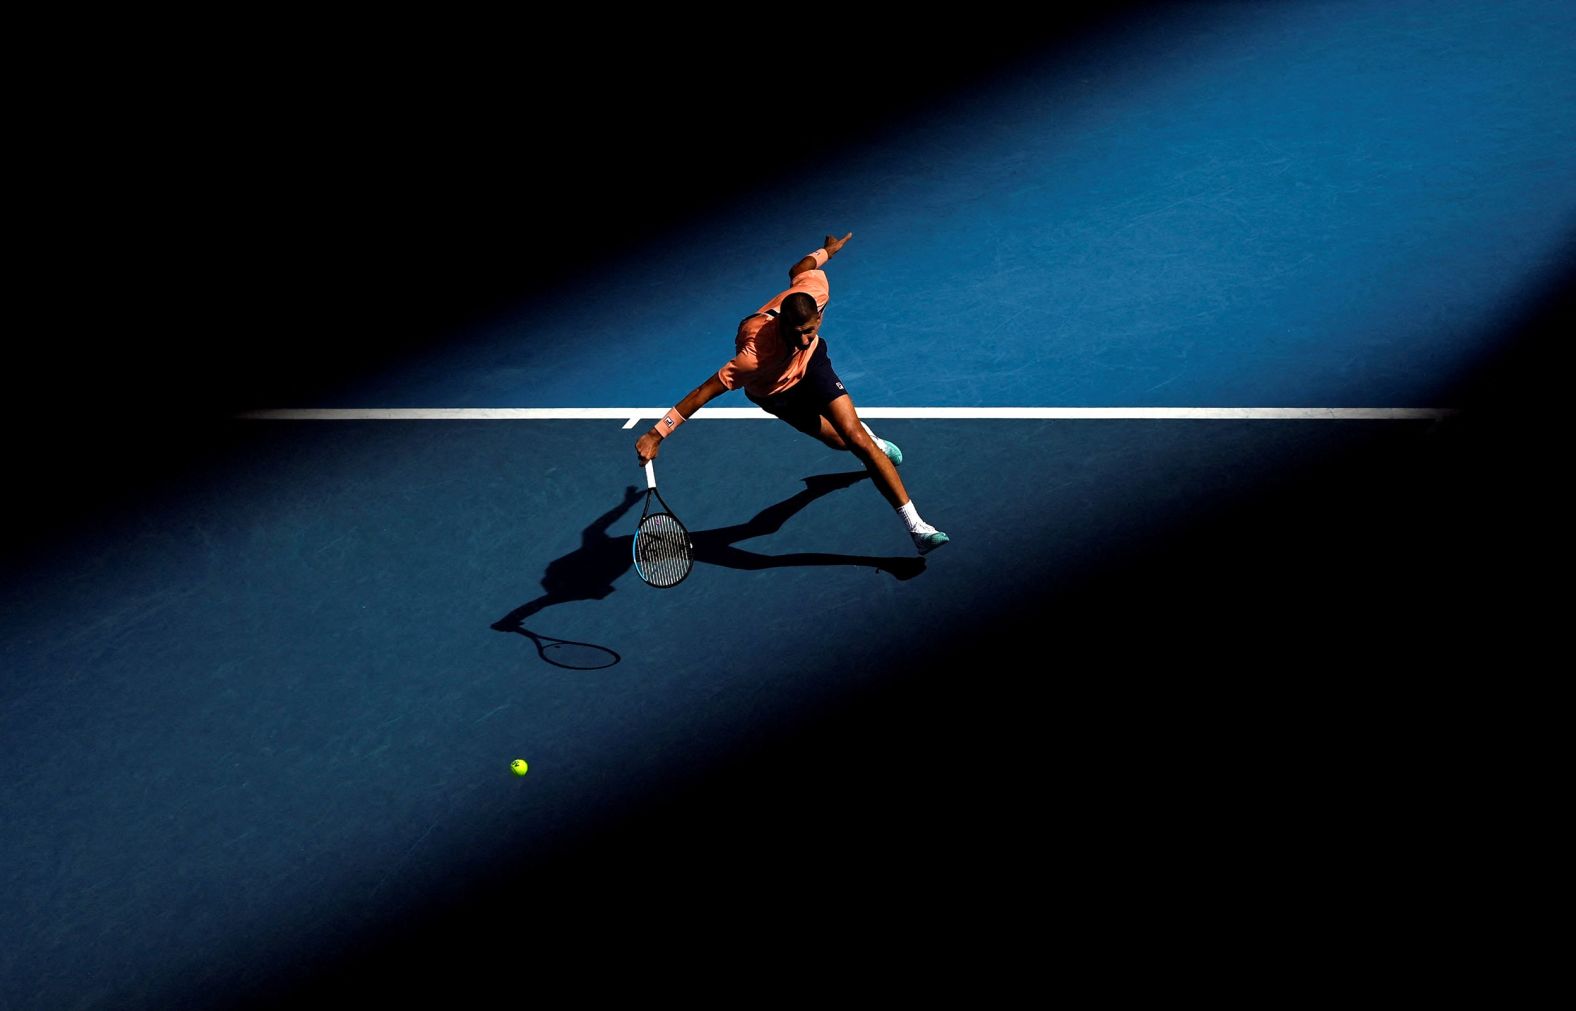 Australia's Alexei Popyrin competes against Taylor Fritz of the United States during the Australian Open in Melbourne on Thursday, January 19.